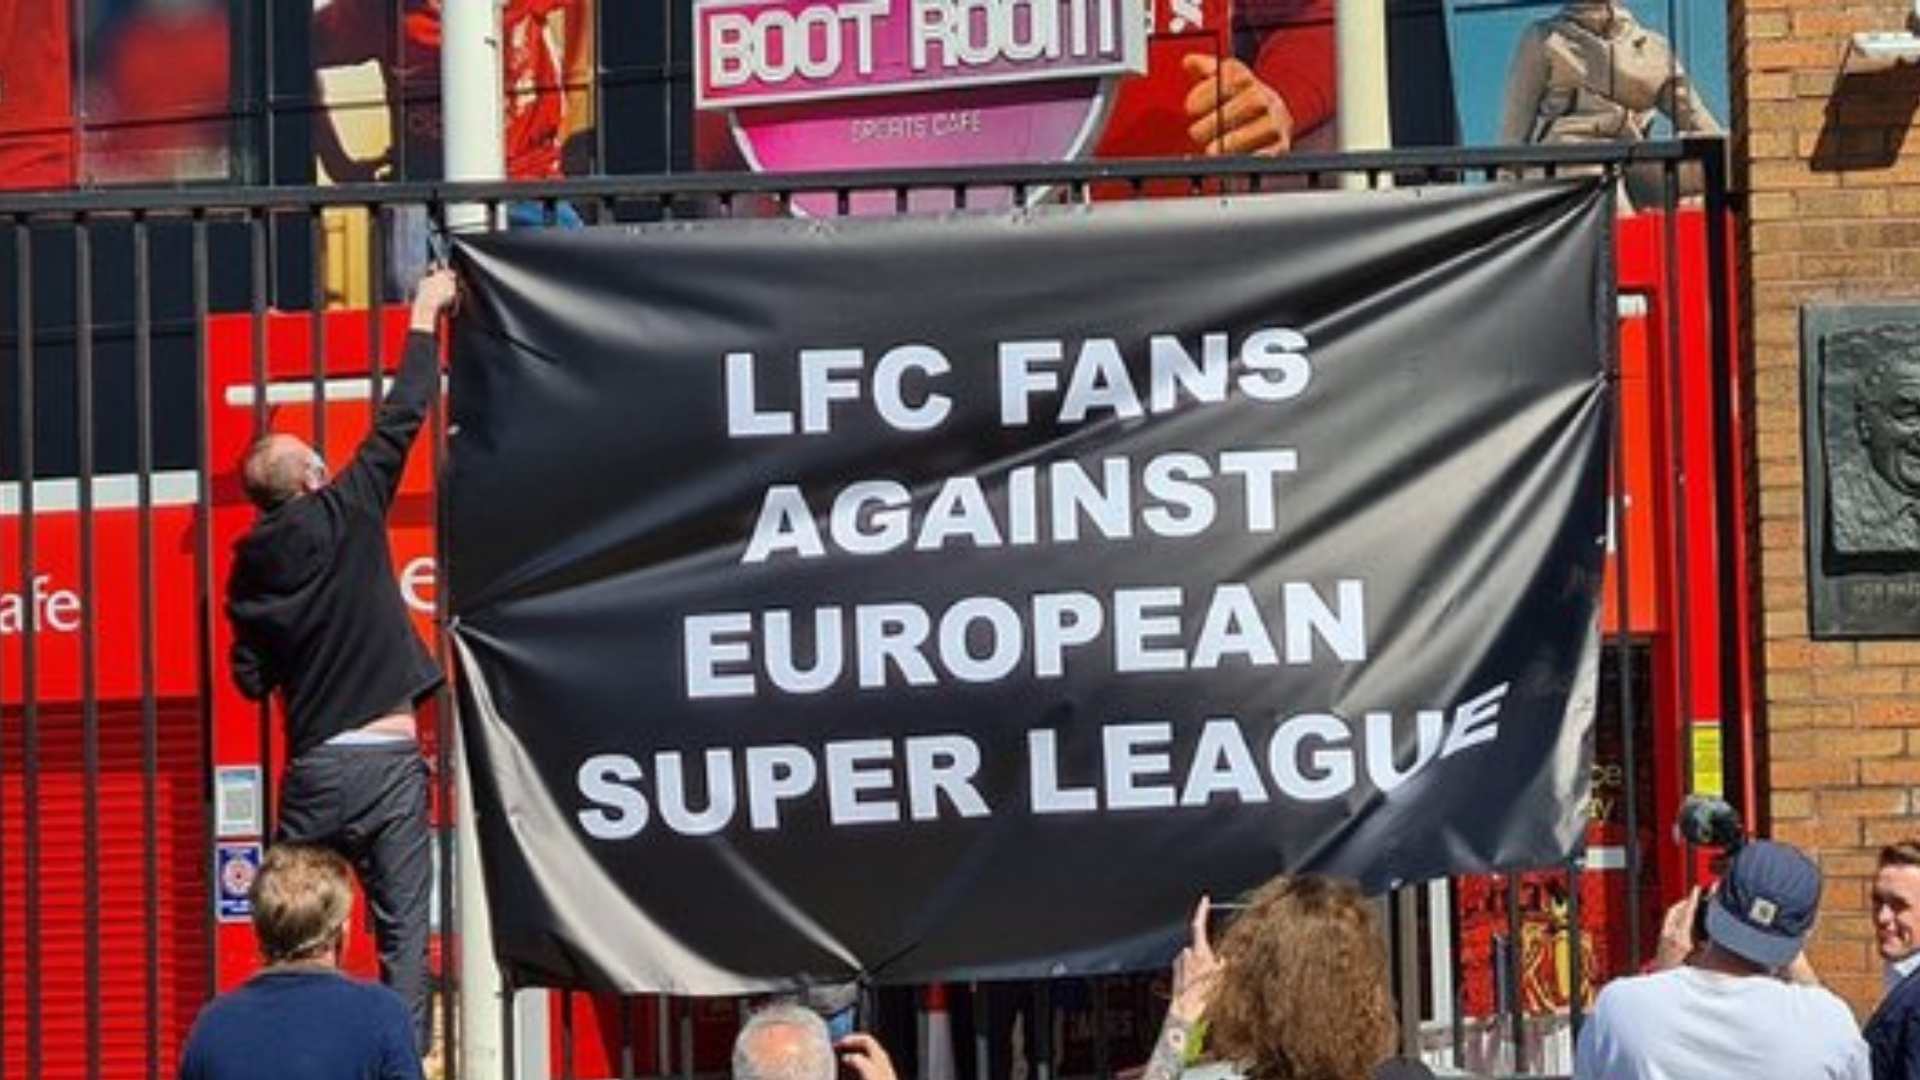 Liverpool fans and the fan clubs from the other Premier League clubs protested vehemently against the European Super League.